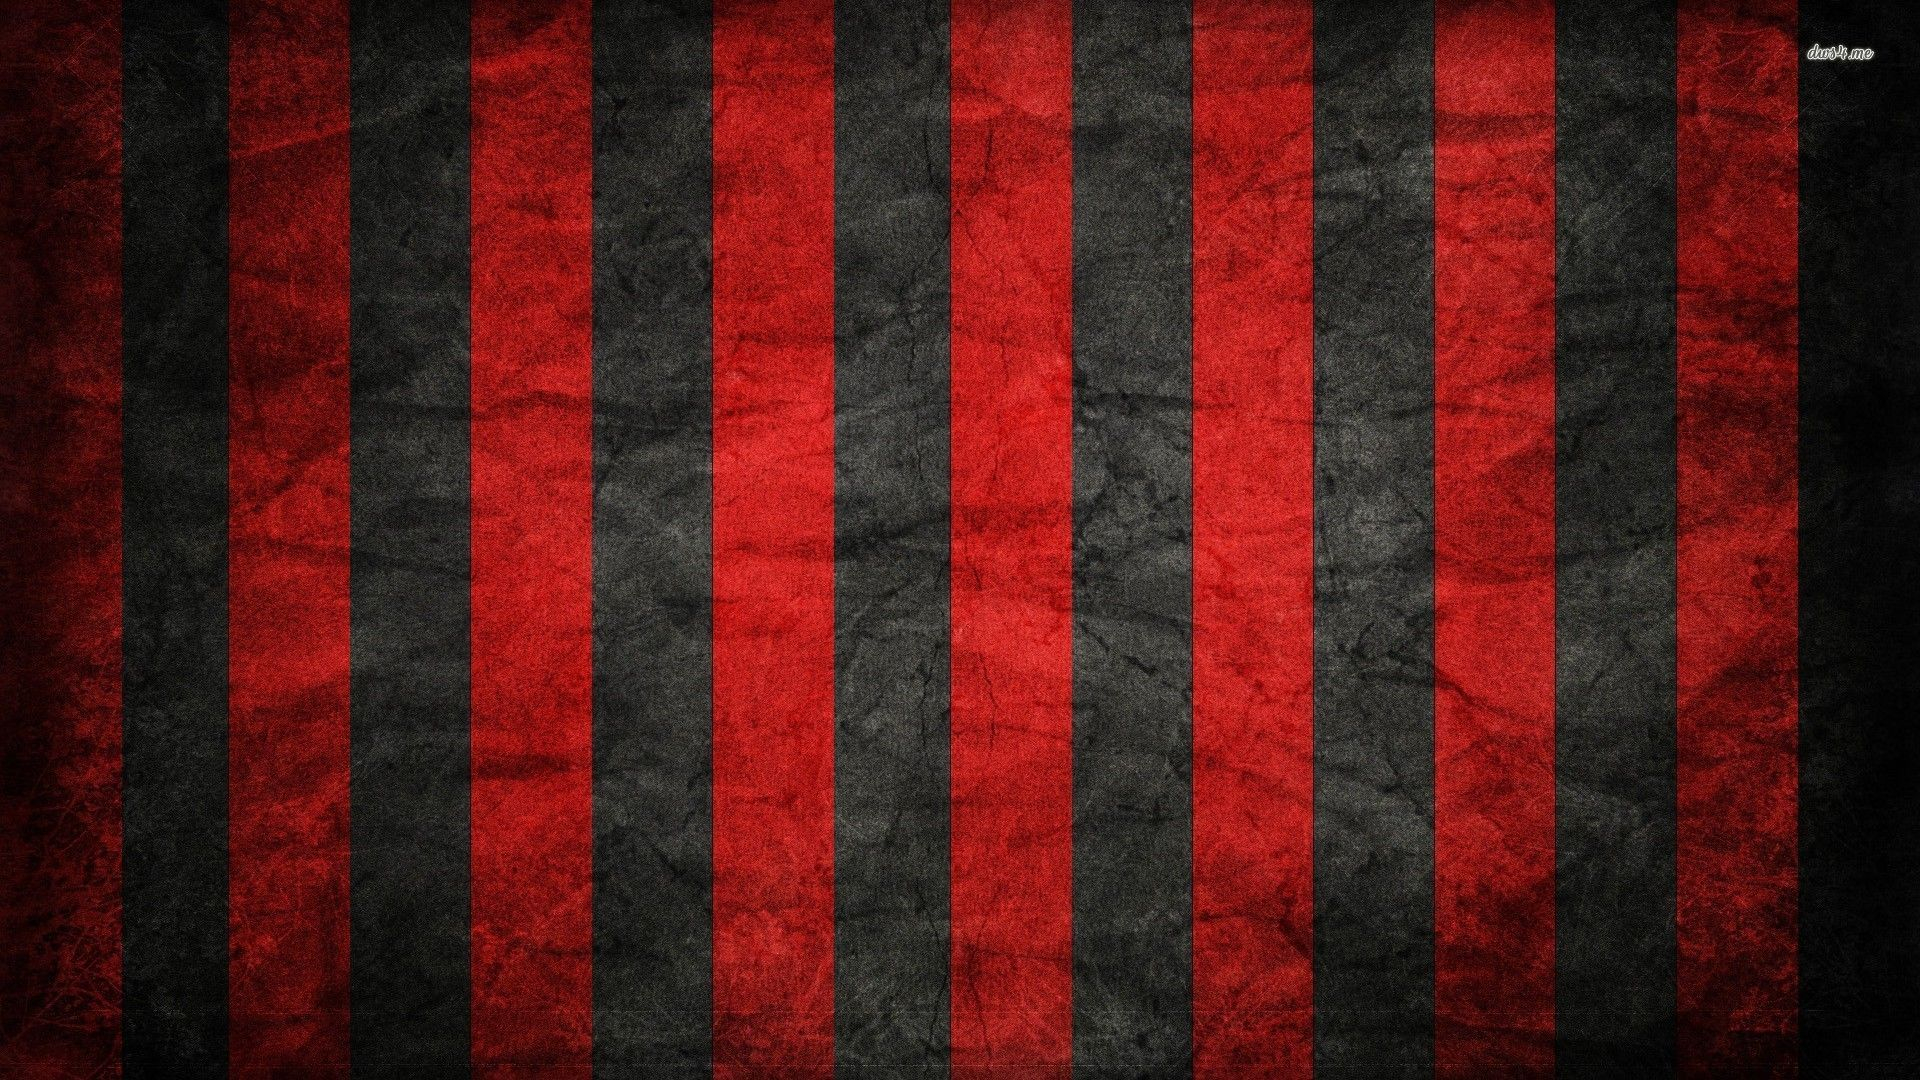 1920x1080 Red and Black Striped Wallpapers Top Free Red and Black Striped Backgrounds